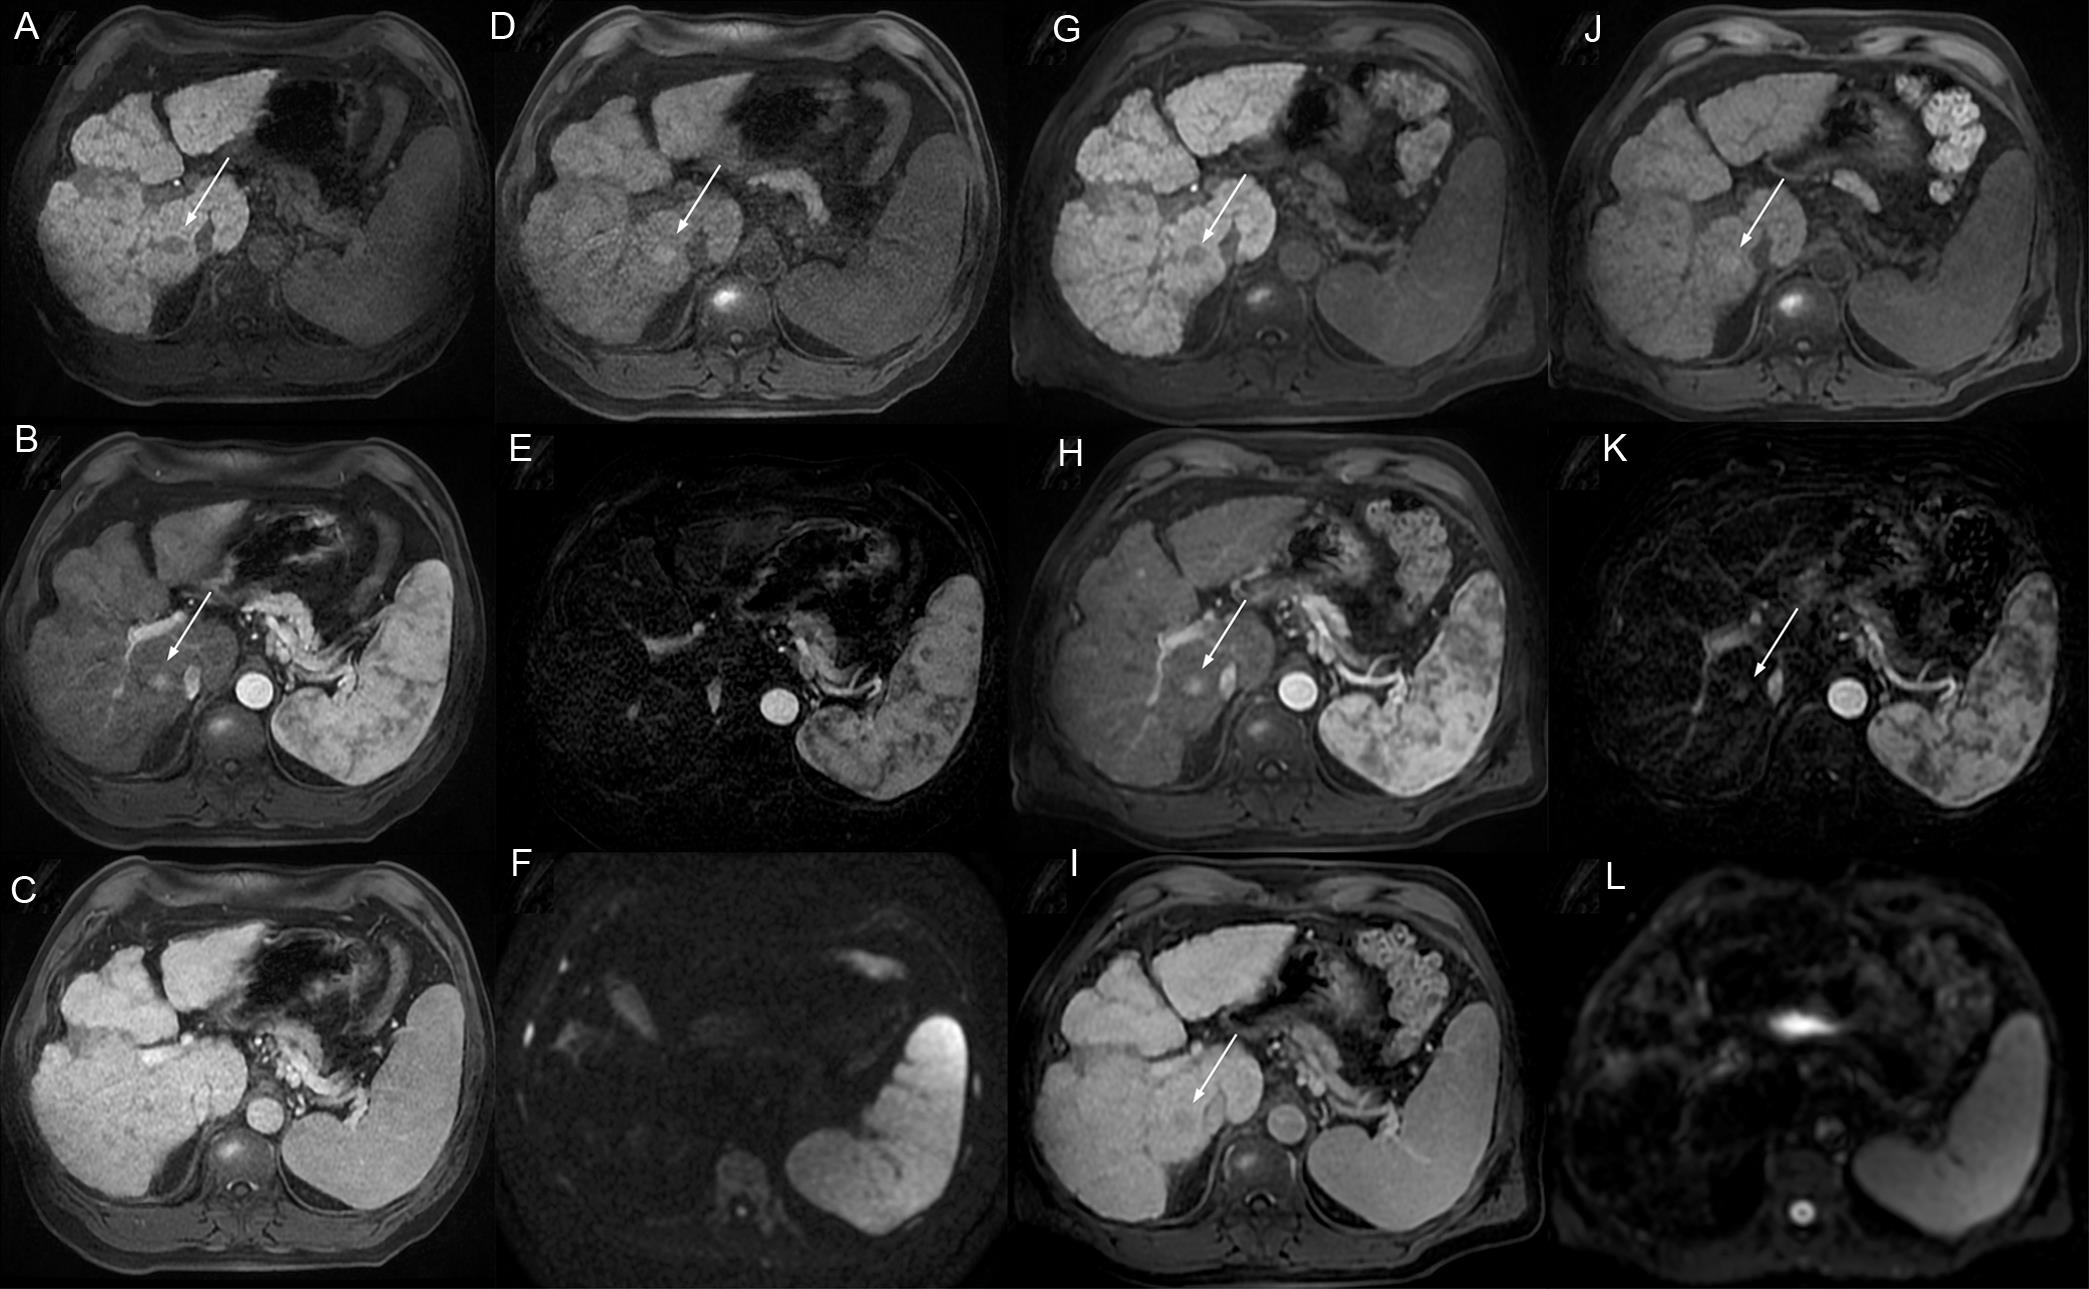 Axial MR images showing a 17 mm nodule in liver segment 6.